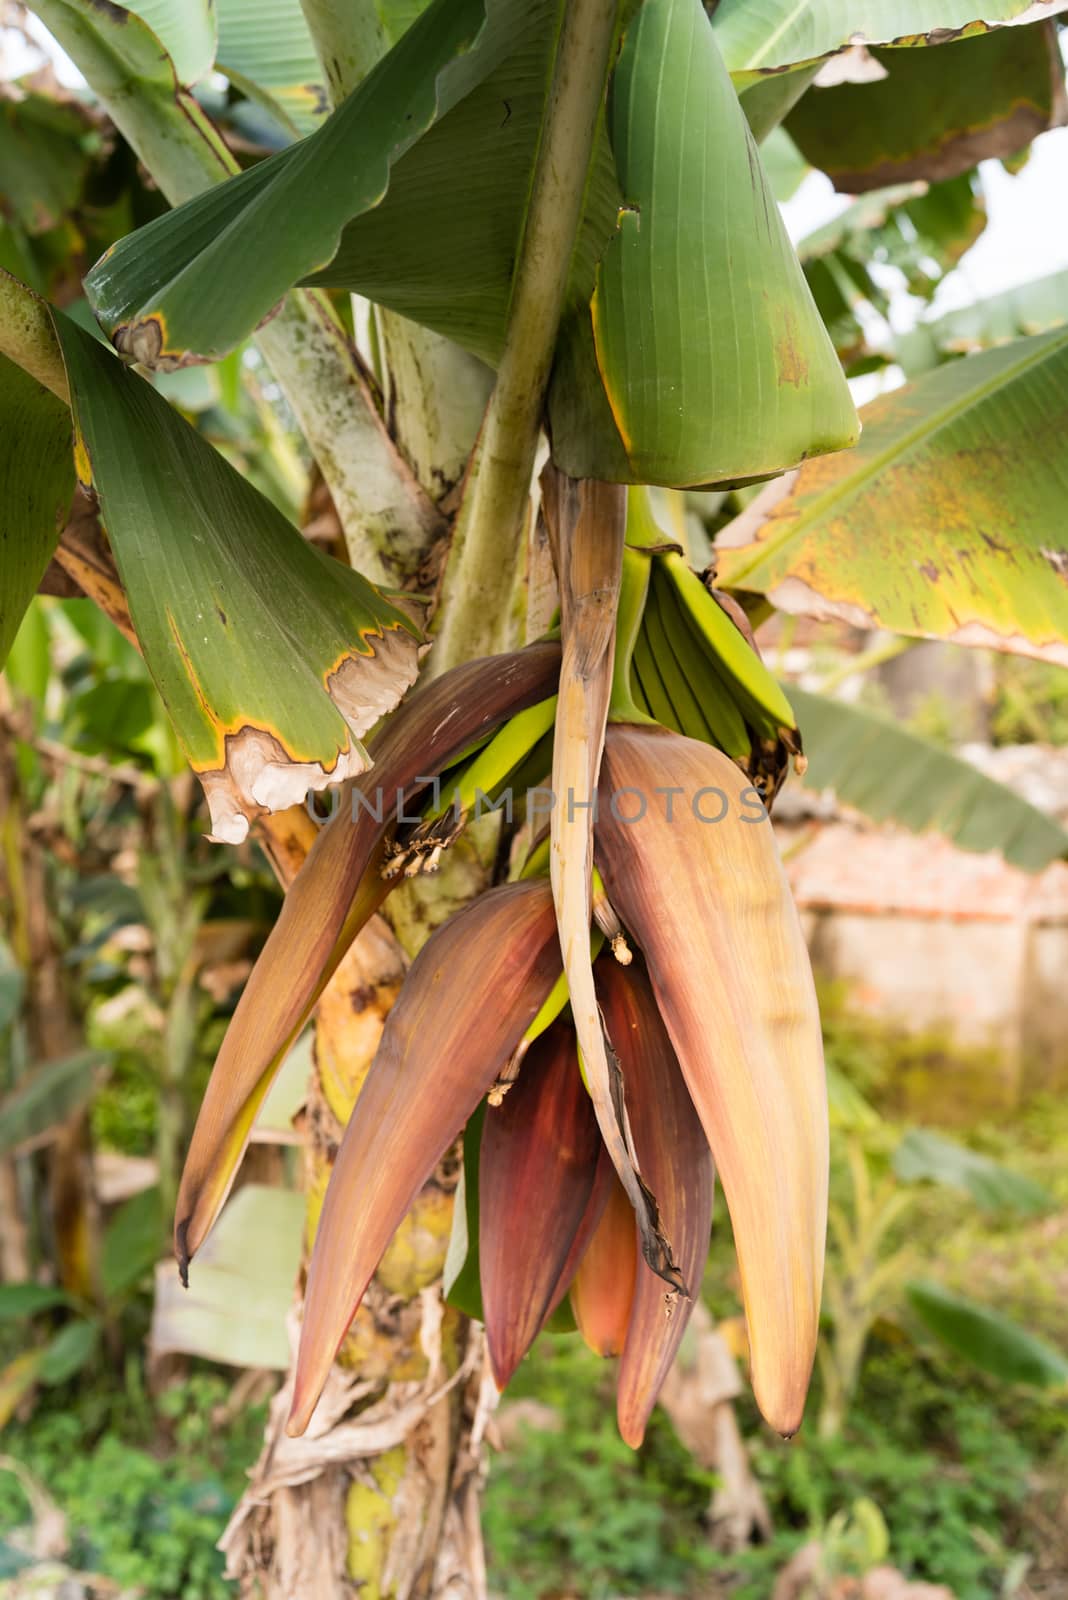 Close-up bunch of young bananas growing from the flower. Vietnamese green variegated banana growing on tree. Great for exotic Asian organic food publication.